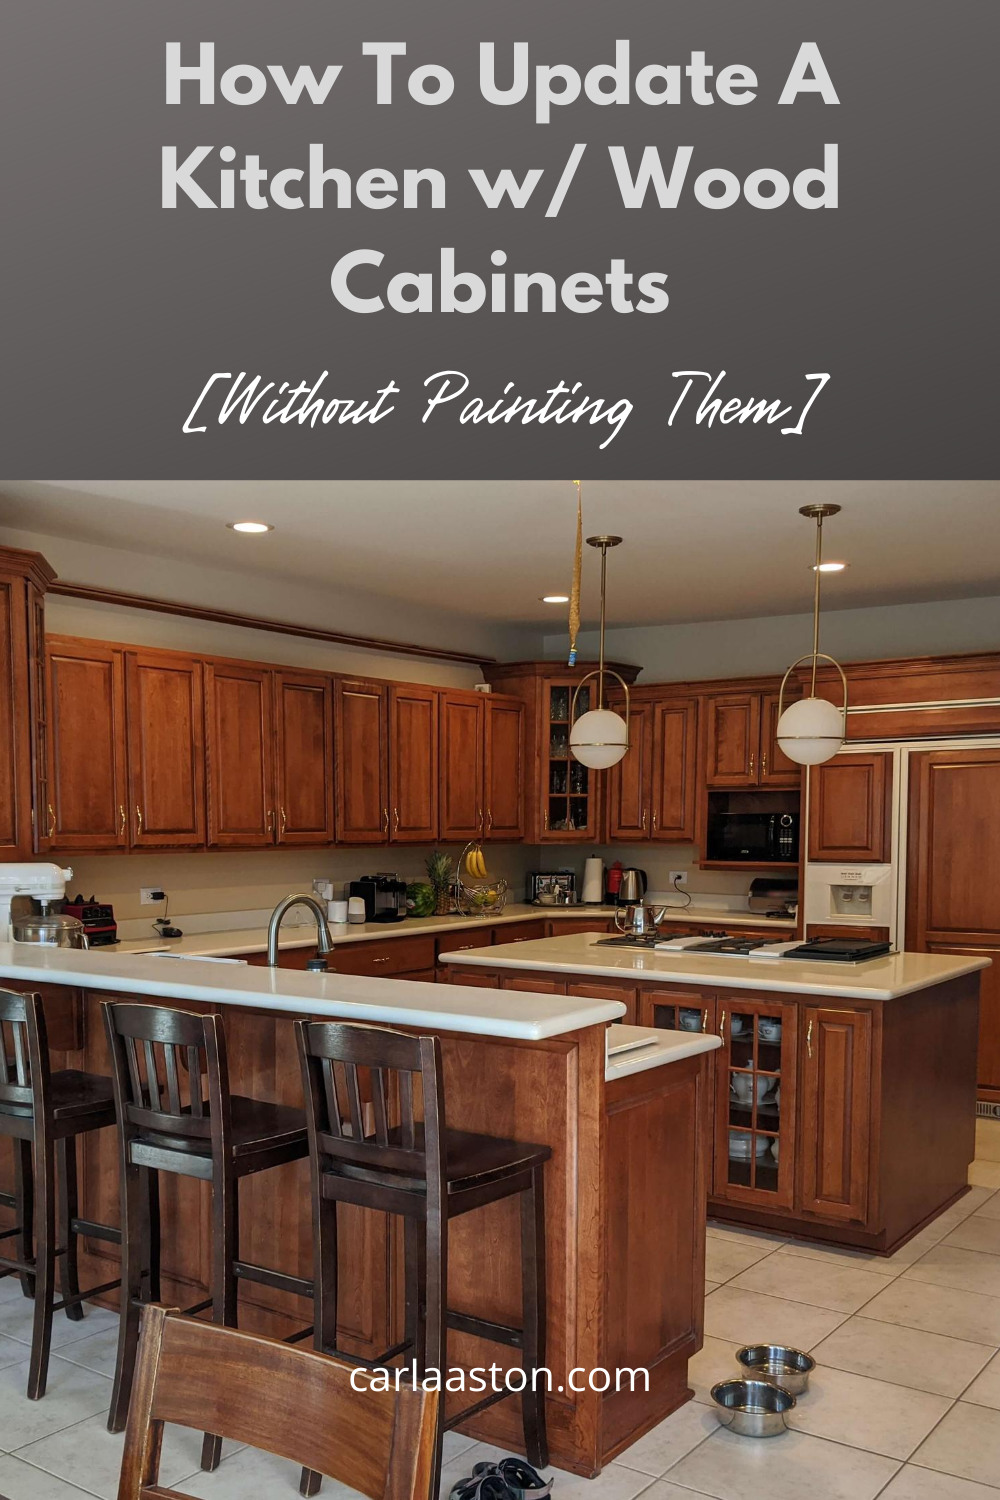 Update A Kitchen With Wood Cabinets, How To Update My Old Kitchen Cabinets